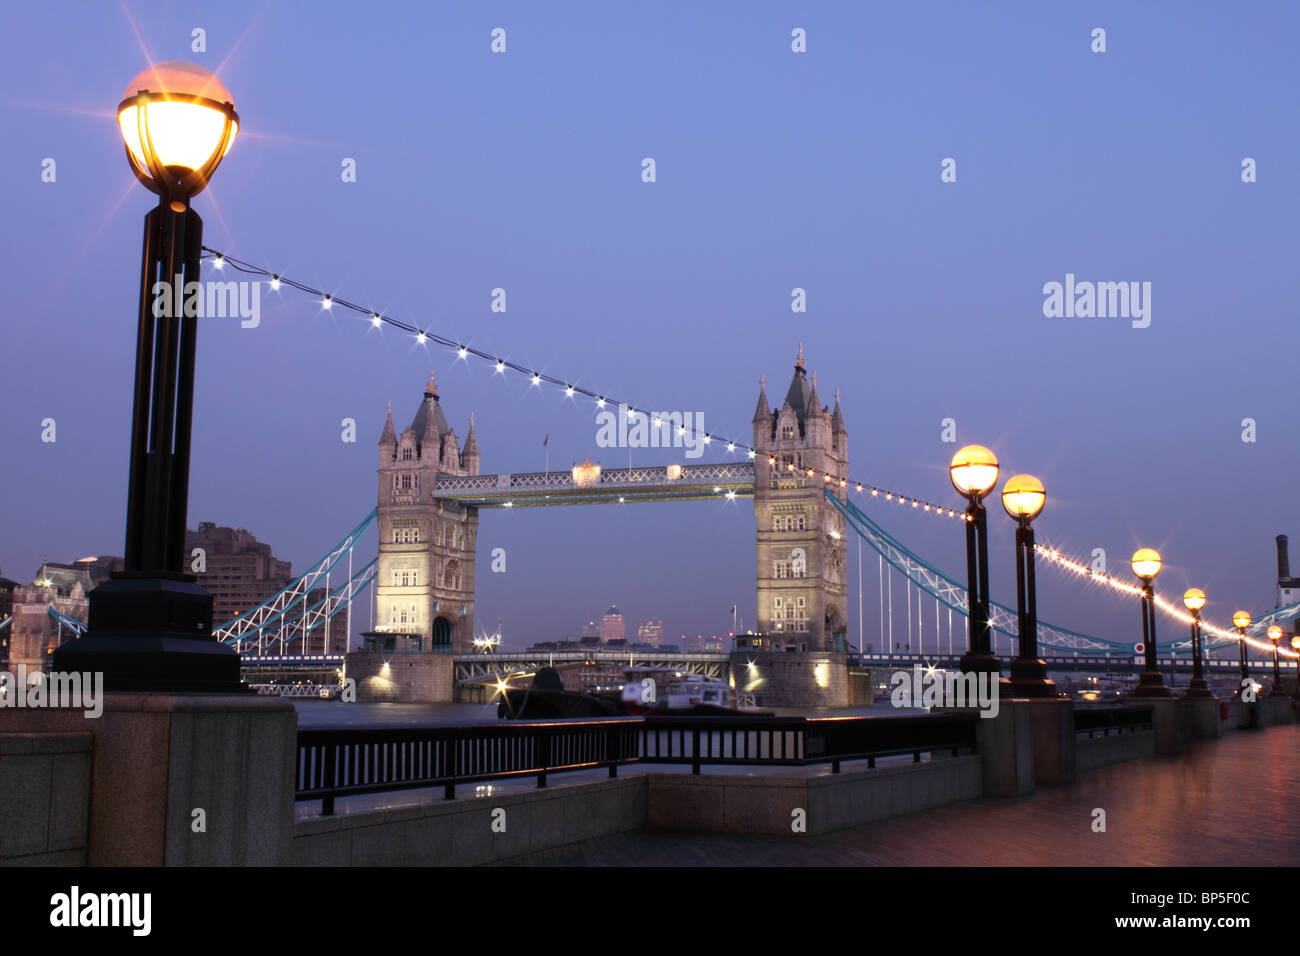 Tower Bridge at dusk from the South bank, with embankment lights in foreground and lights on bridge, London, England, UK Stock Photo